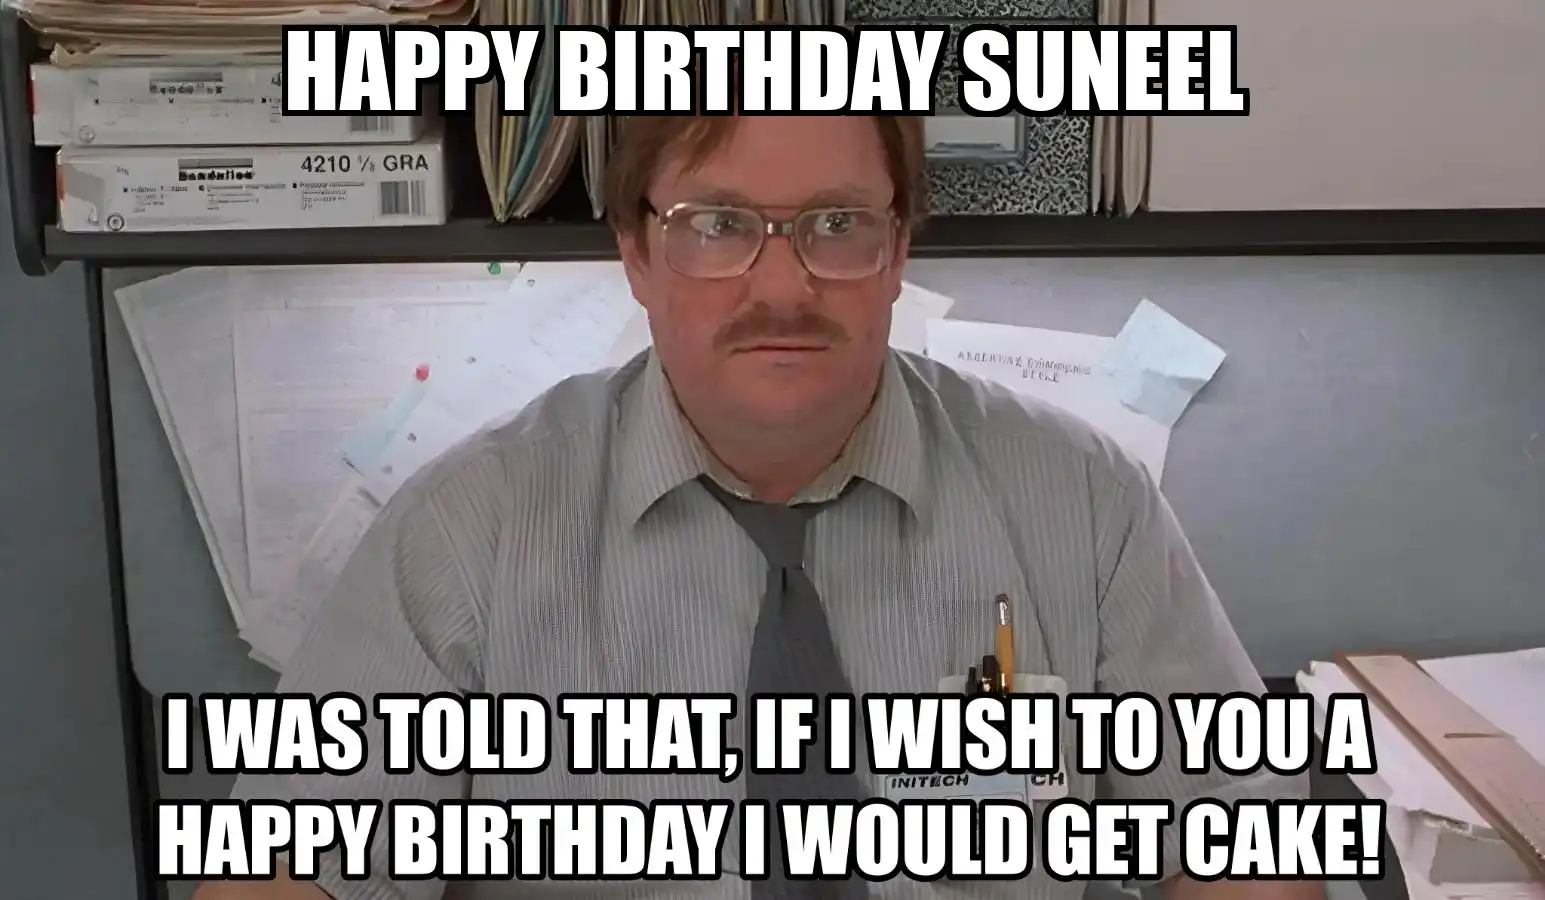 Happy Birthday Suneel I Would Get A Cake Meme